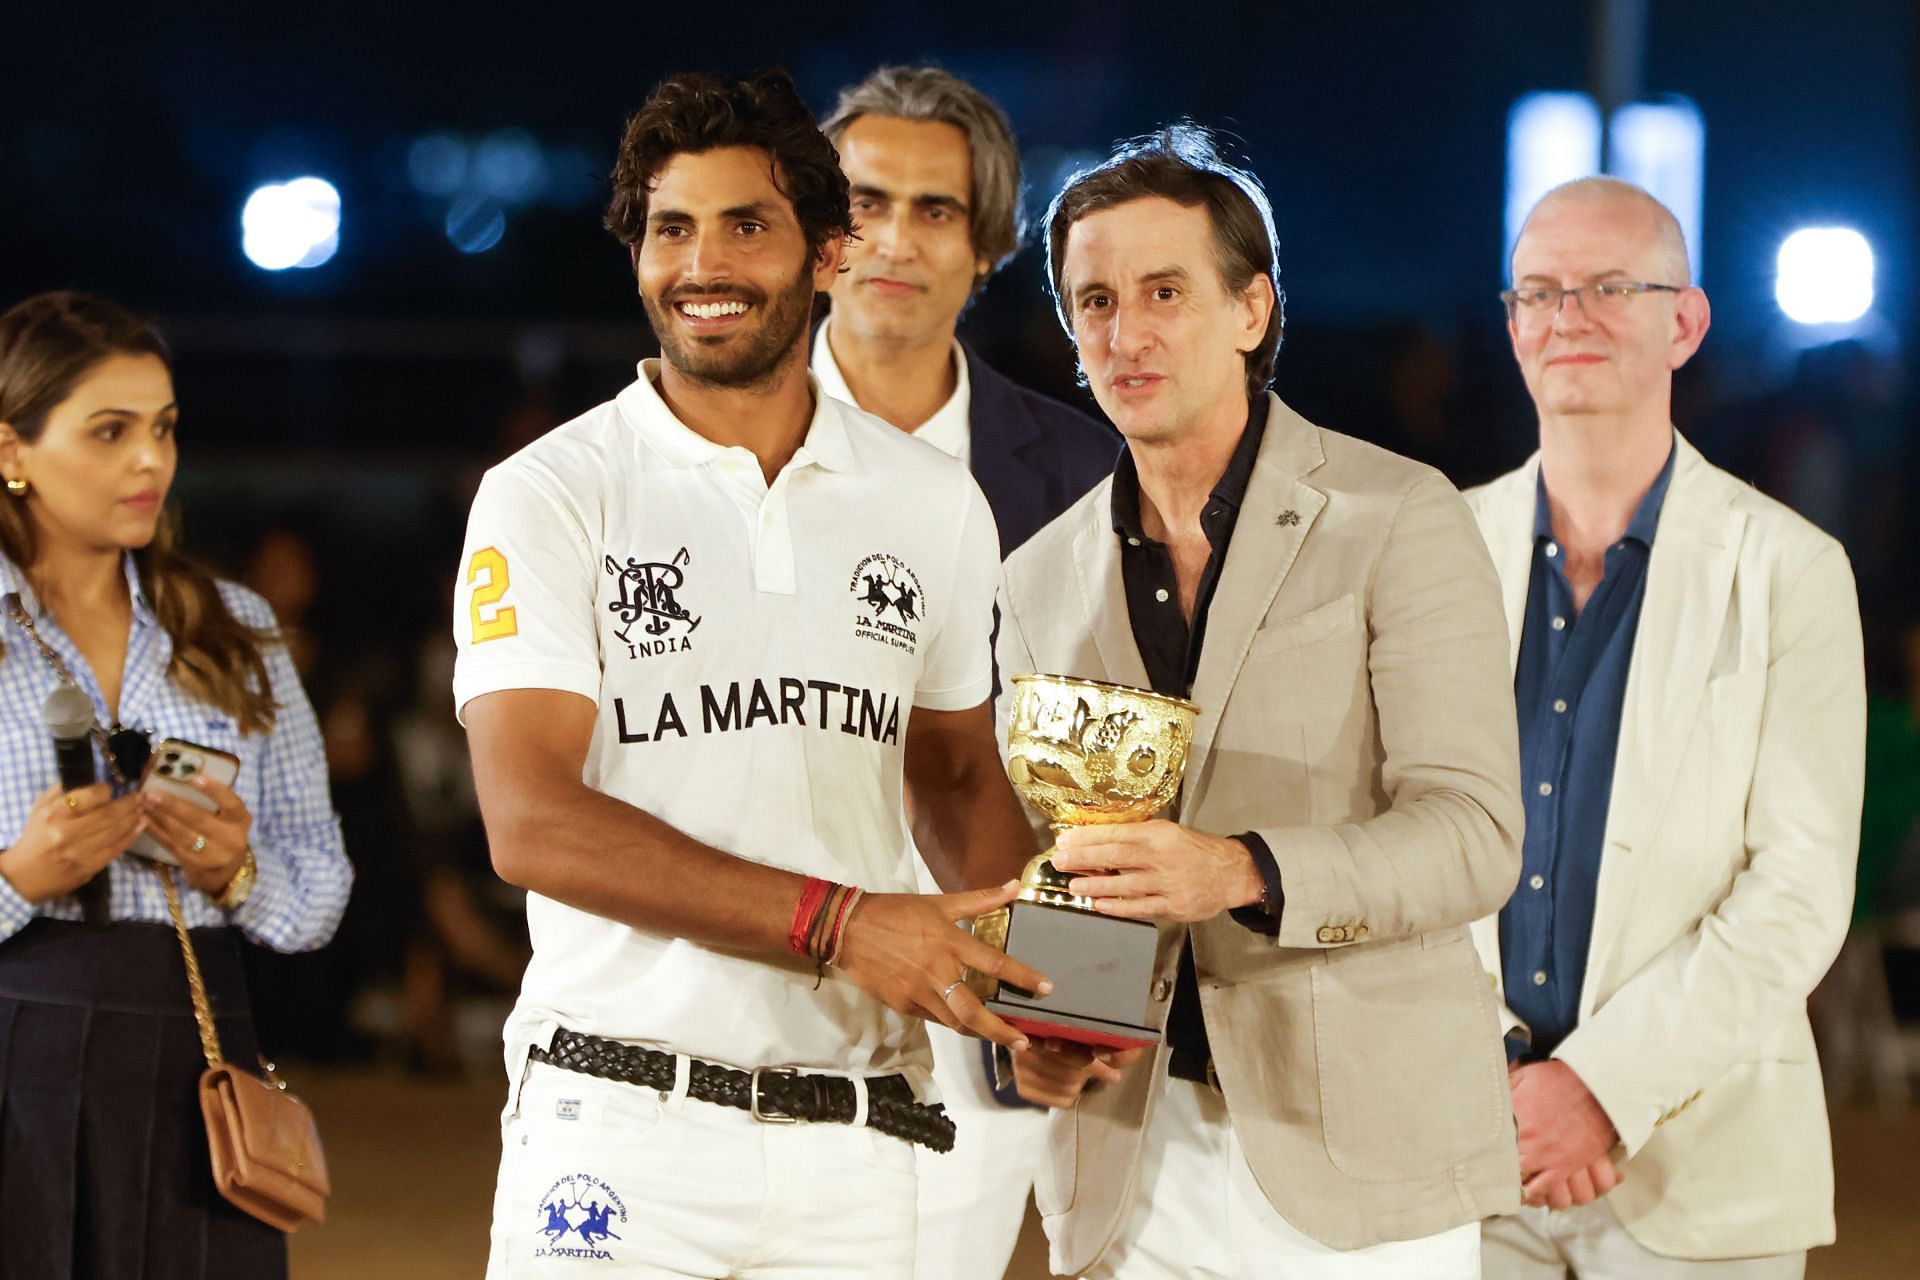 Naveen Singh (second from left) receives a trophy after the exhibition match.